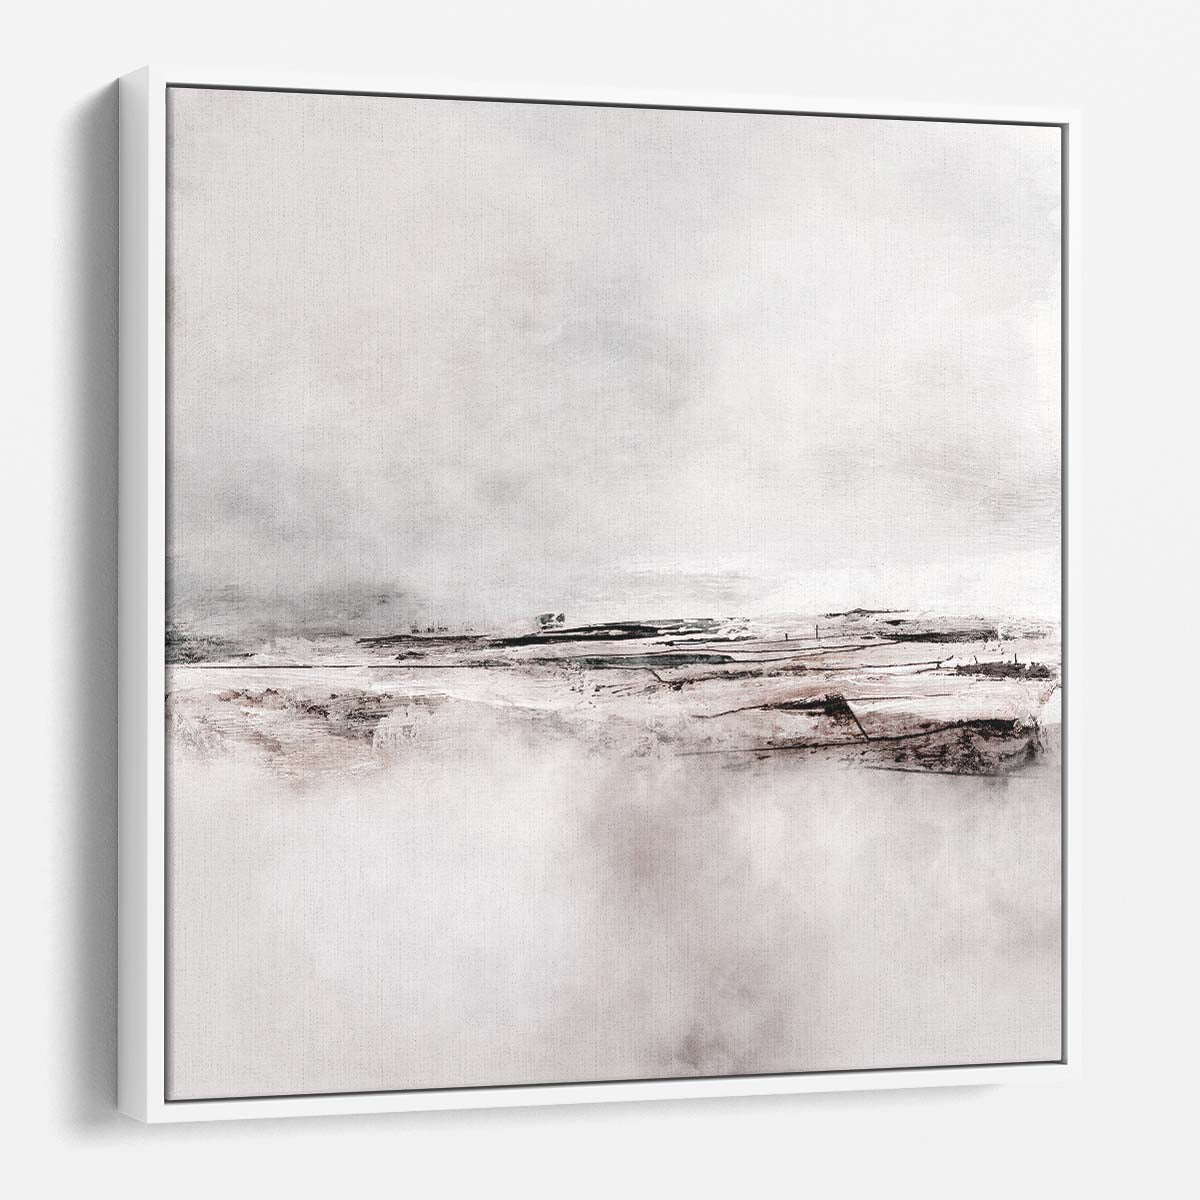 Modern Minimalist Abstract Landscape by Dan Hobday Wall Art by Luxuriance Designs. Made in USA.